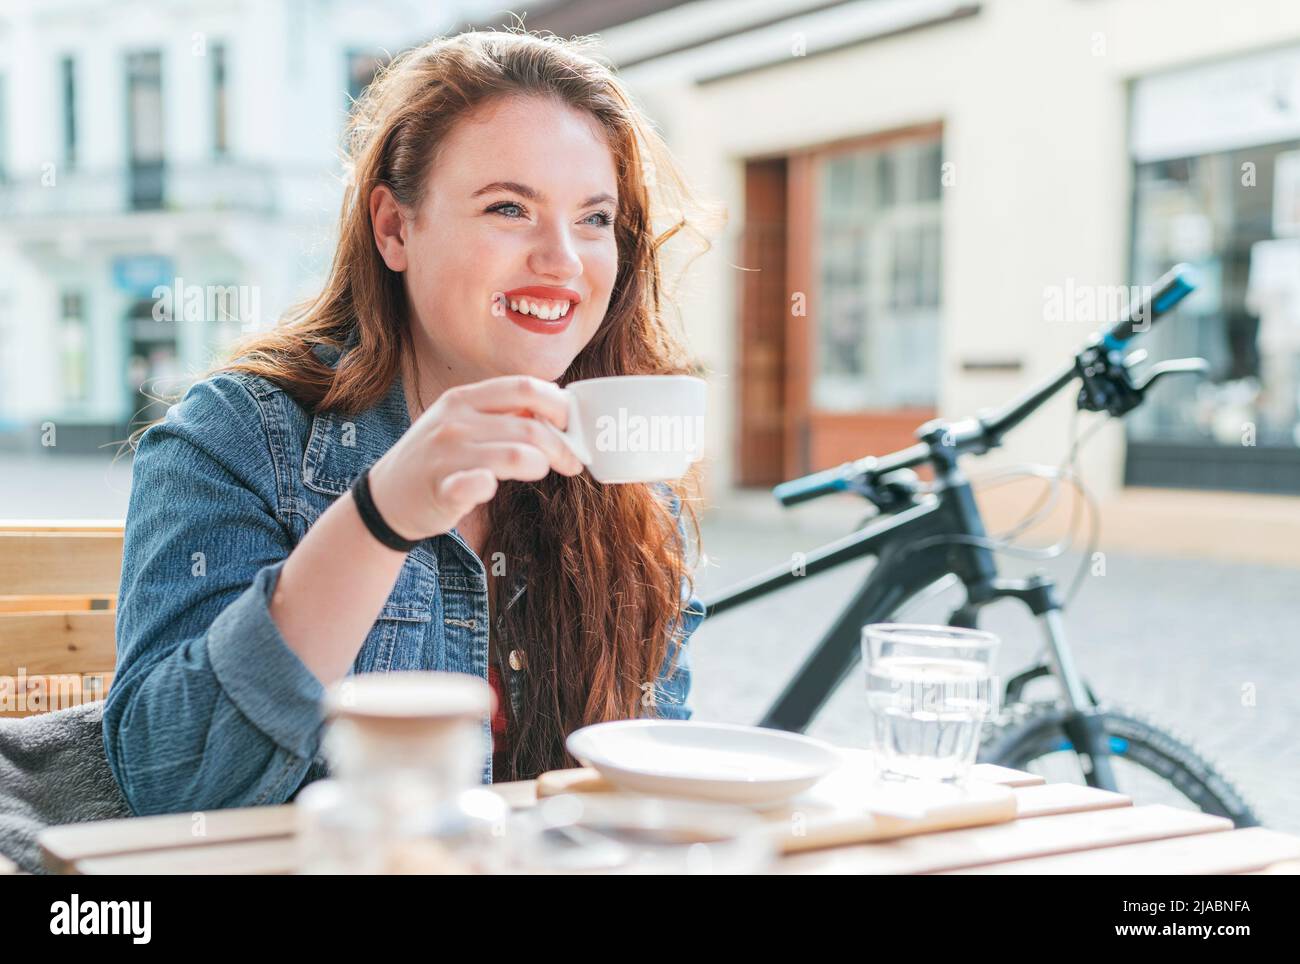 Portrait of sad red curled long hair caucasian teen girl sitting on a cozy cafe outdoor terrace on the street and drinking coffee. Young woman taking Stock Photo